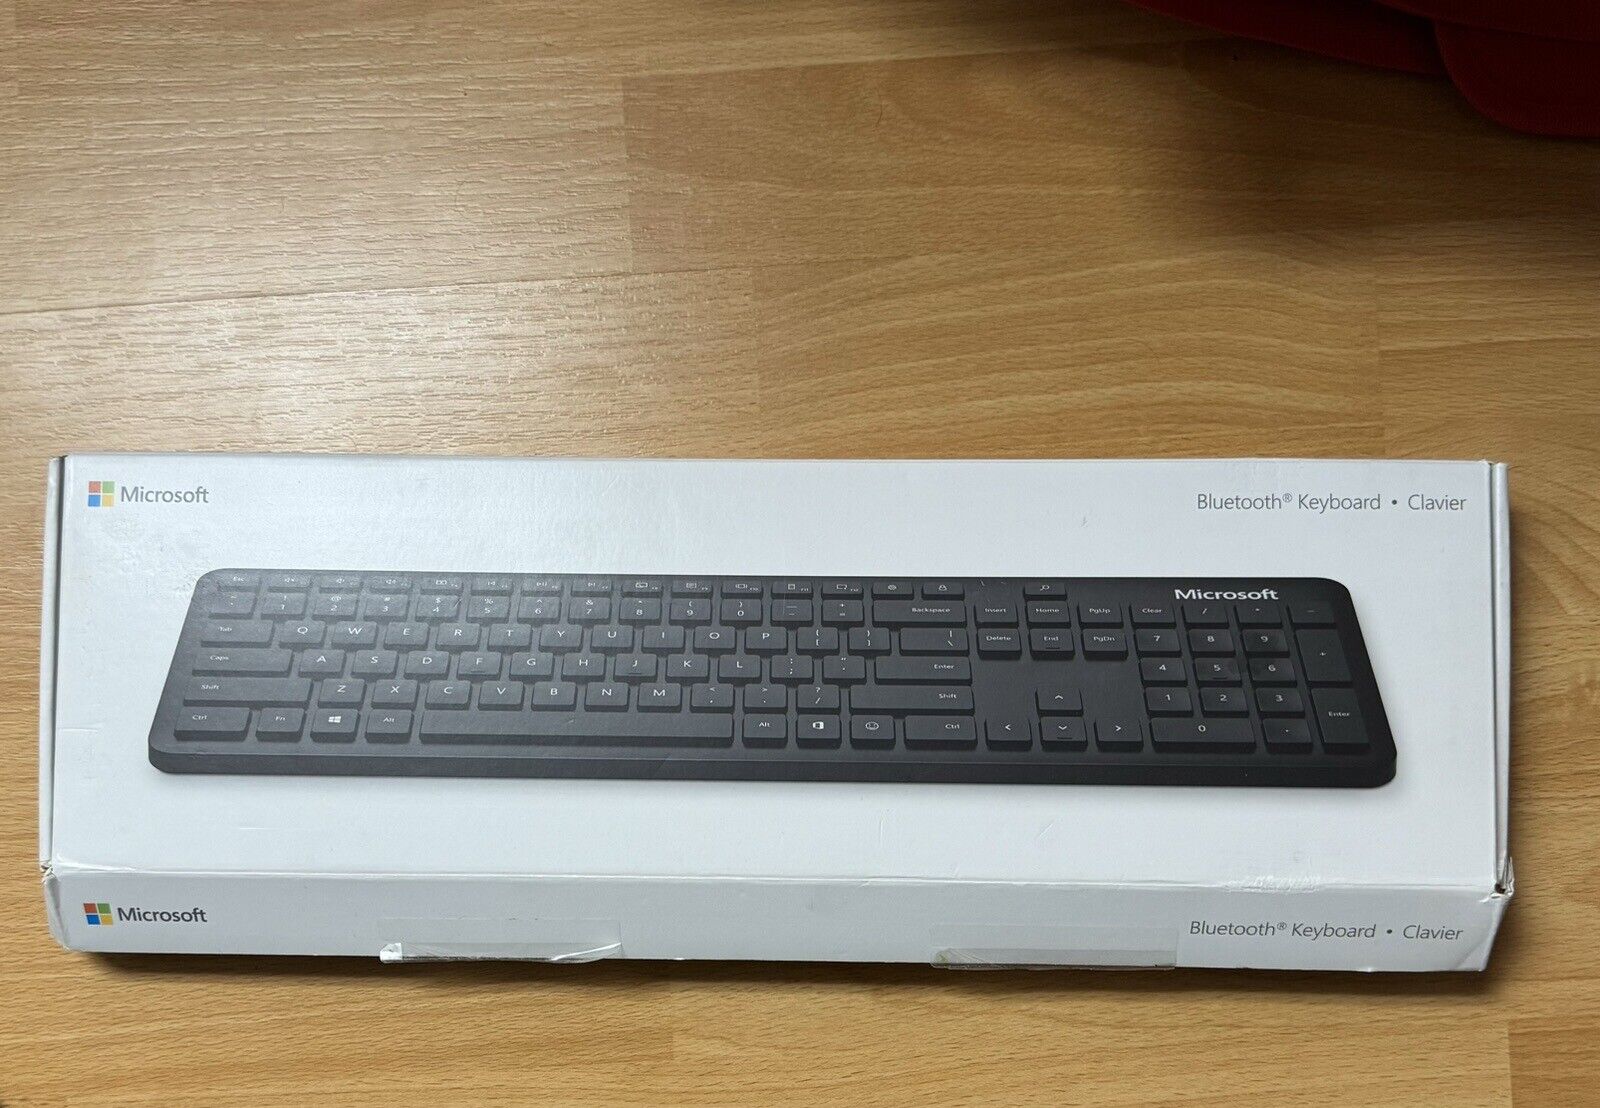 Microsoft Bluetooth Keyboard Model 1898 With Bluetooth Connectivity